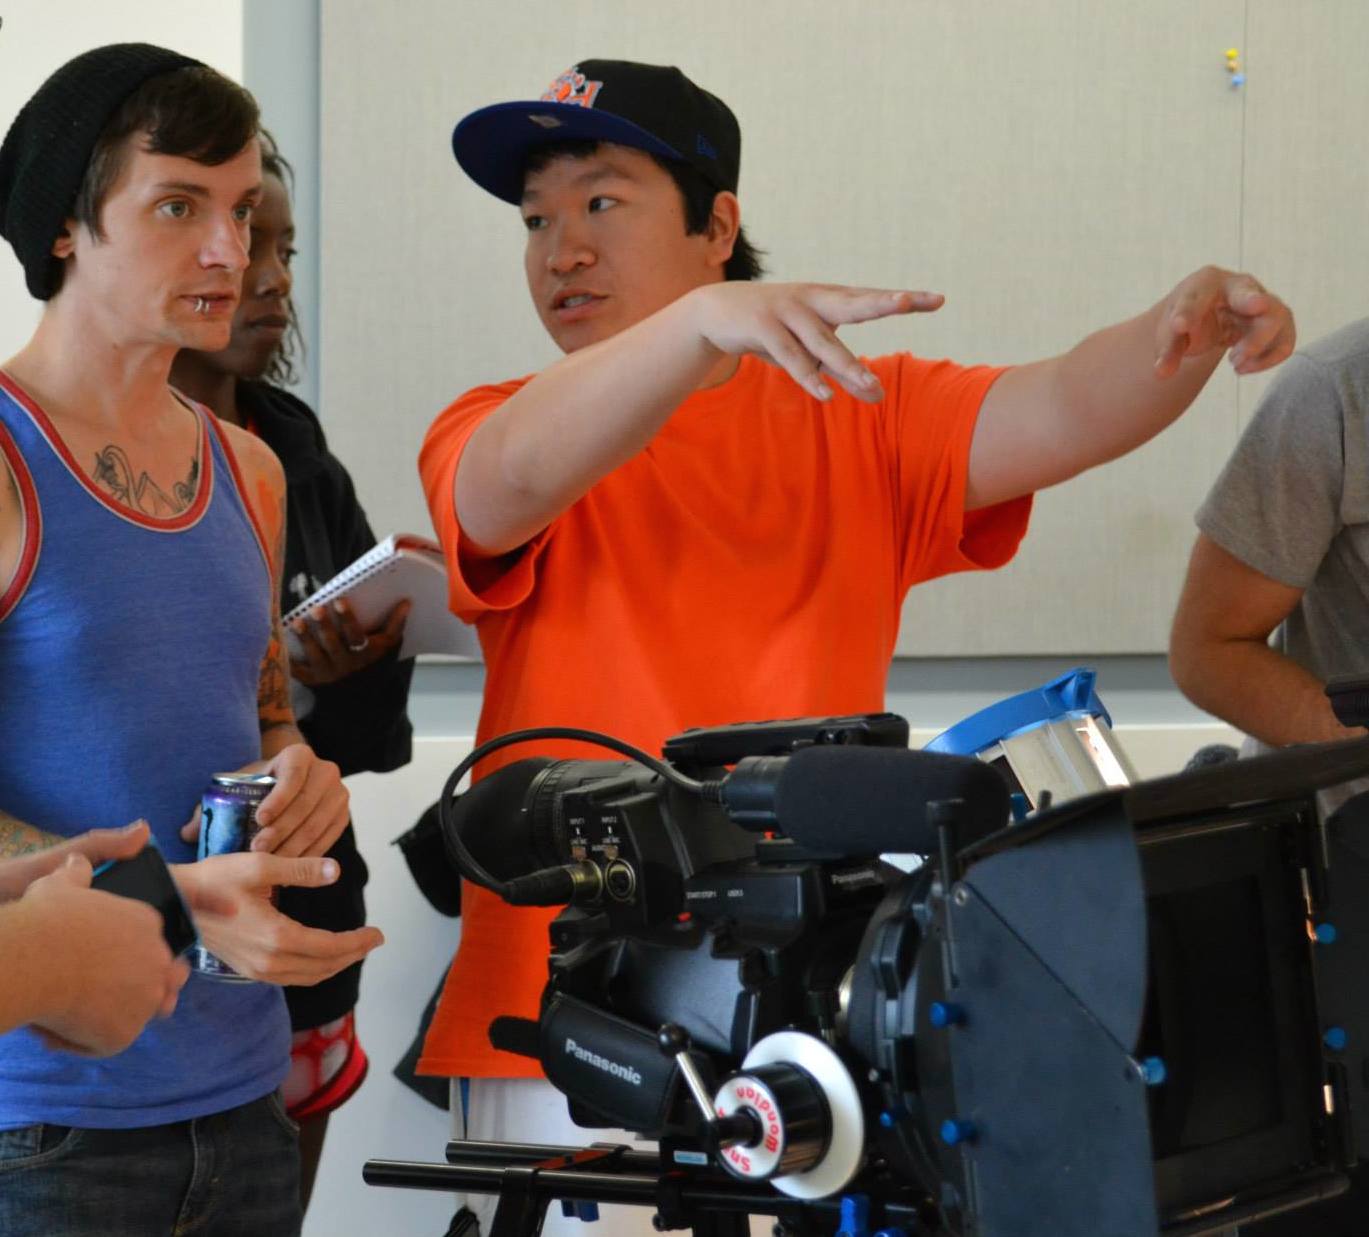 Monty Sloan and Khoi Nguyen working on a documentary